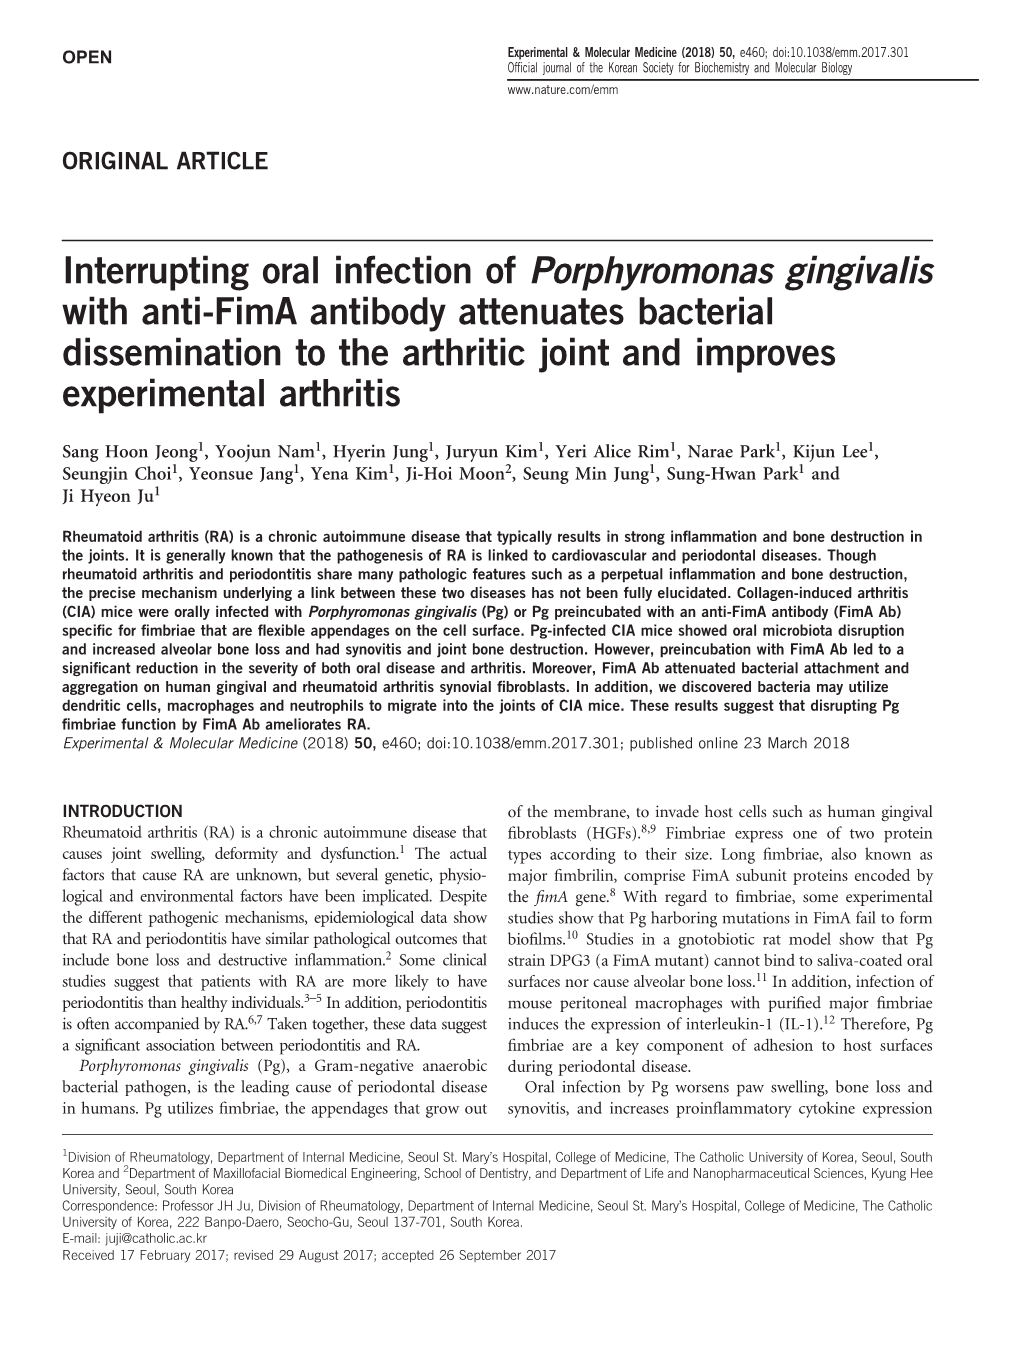 Interrupting Oral Infection of Porphyromonas Gingivalis with Anti